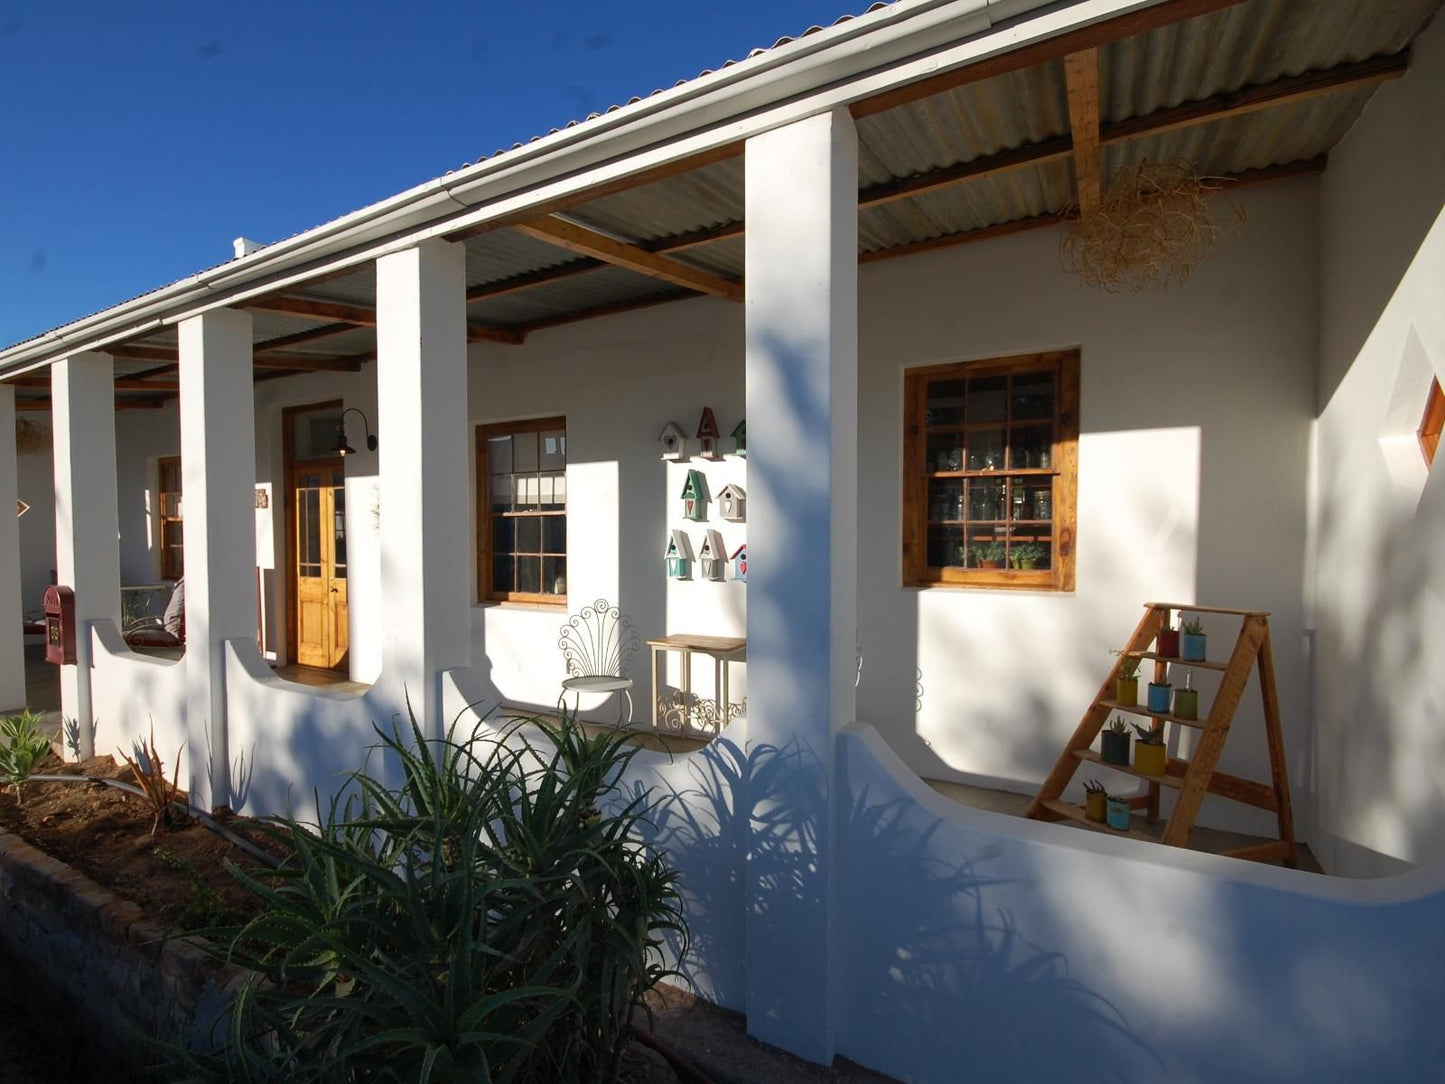 Ta Mala S Cottage Prince Albert Western Cape South Africa House, Building, Architecture